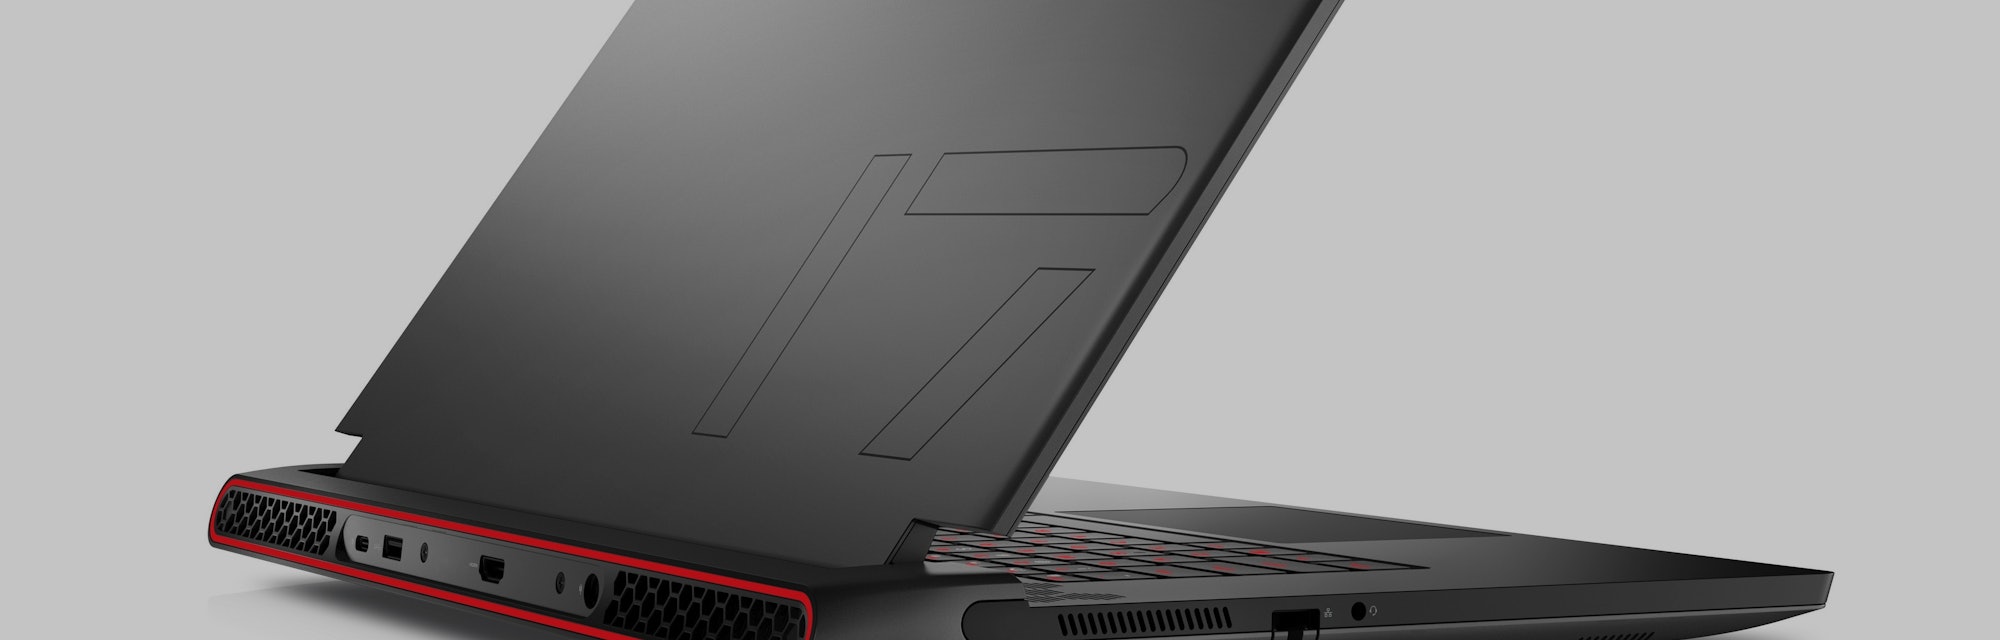 2022 Alienware m17 gaming laptop has a bulky backside